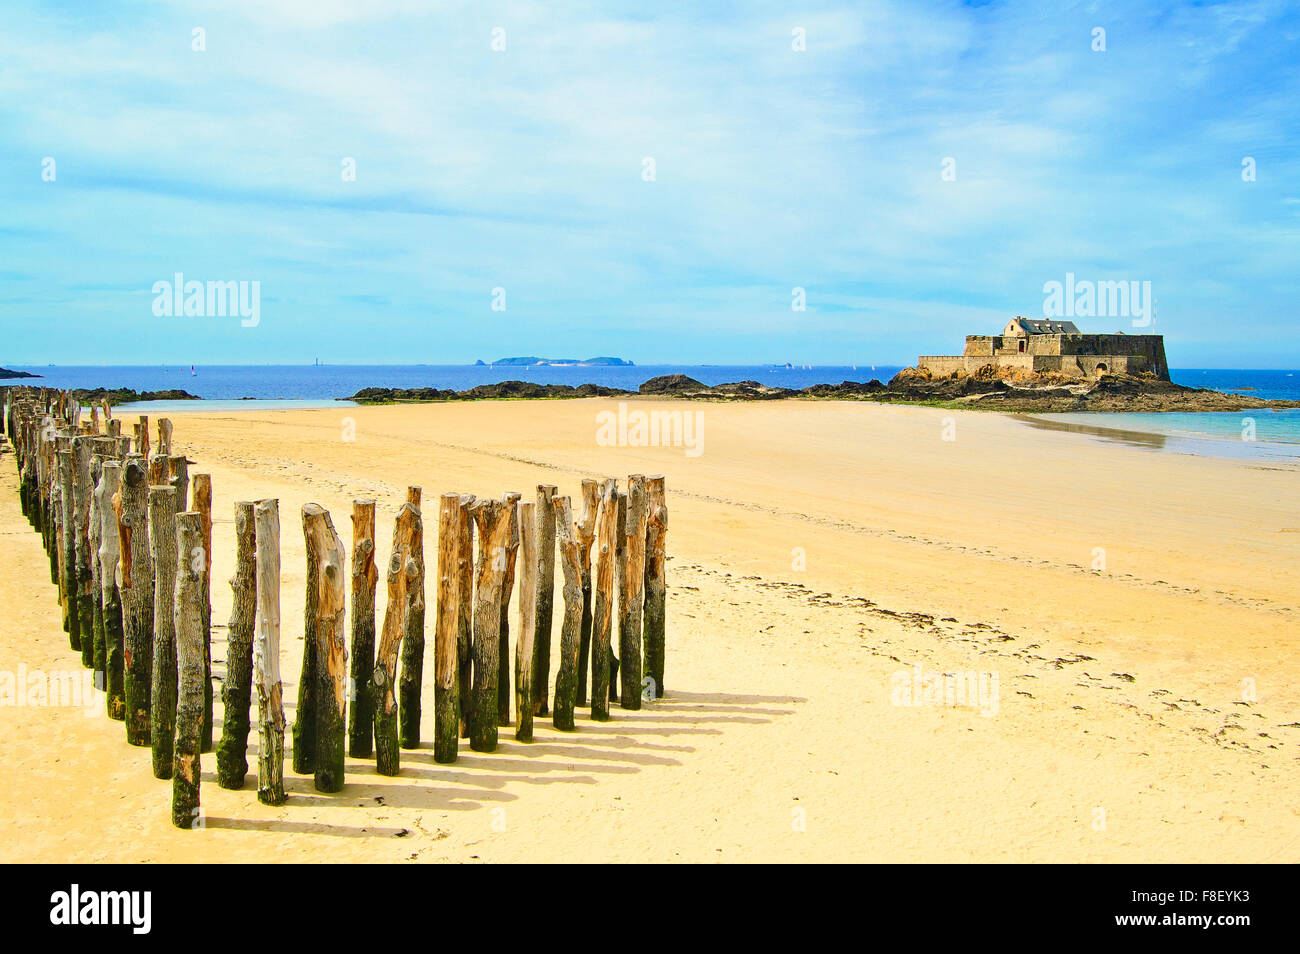 Saint Malo beach, Fort National and wooden poles during Low Tide. Brittany, France, Europe. Stock Photo